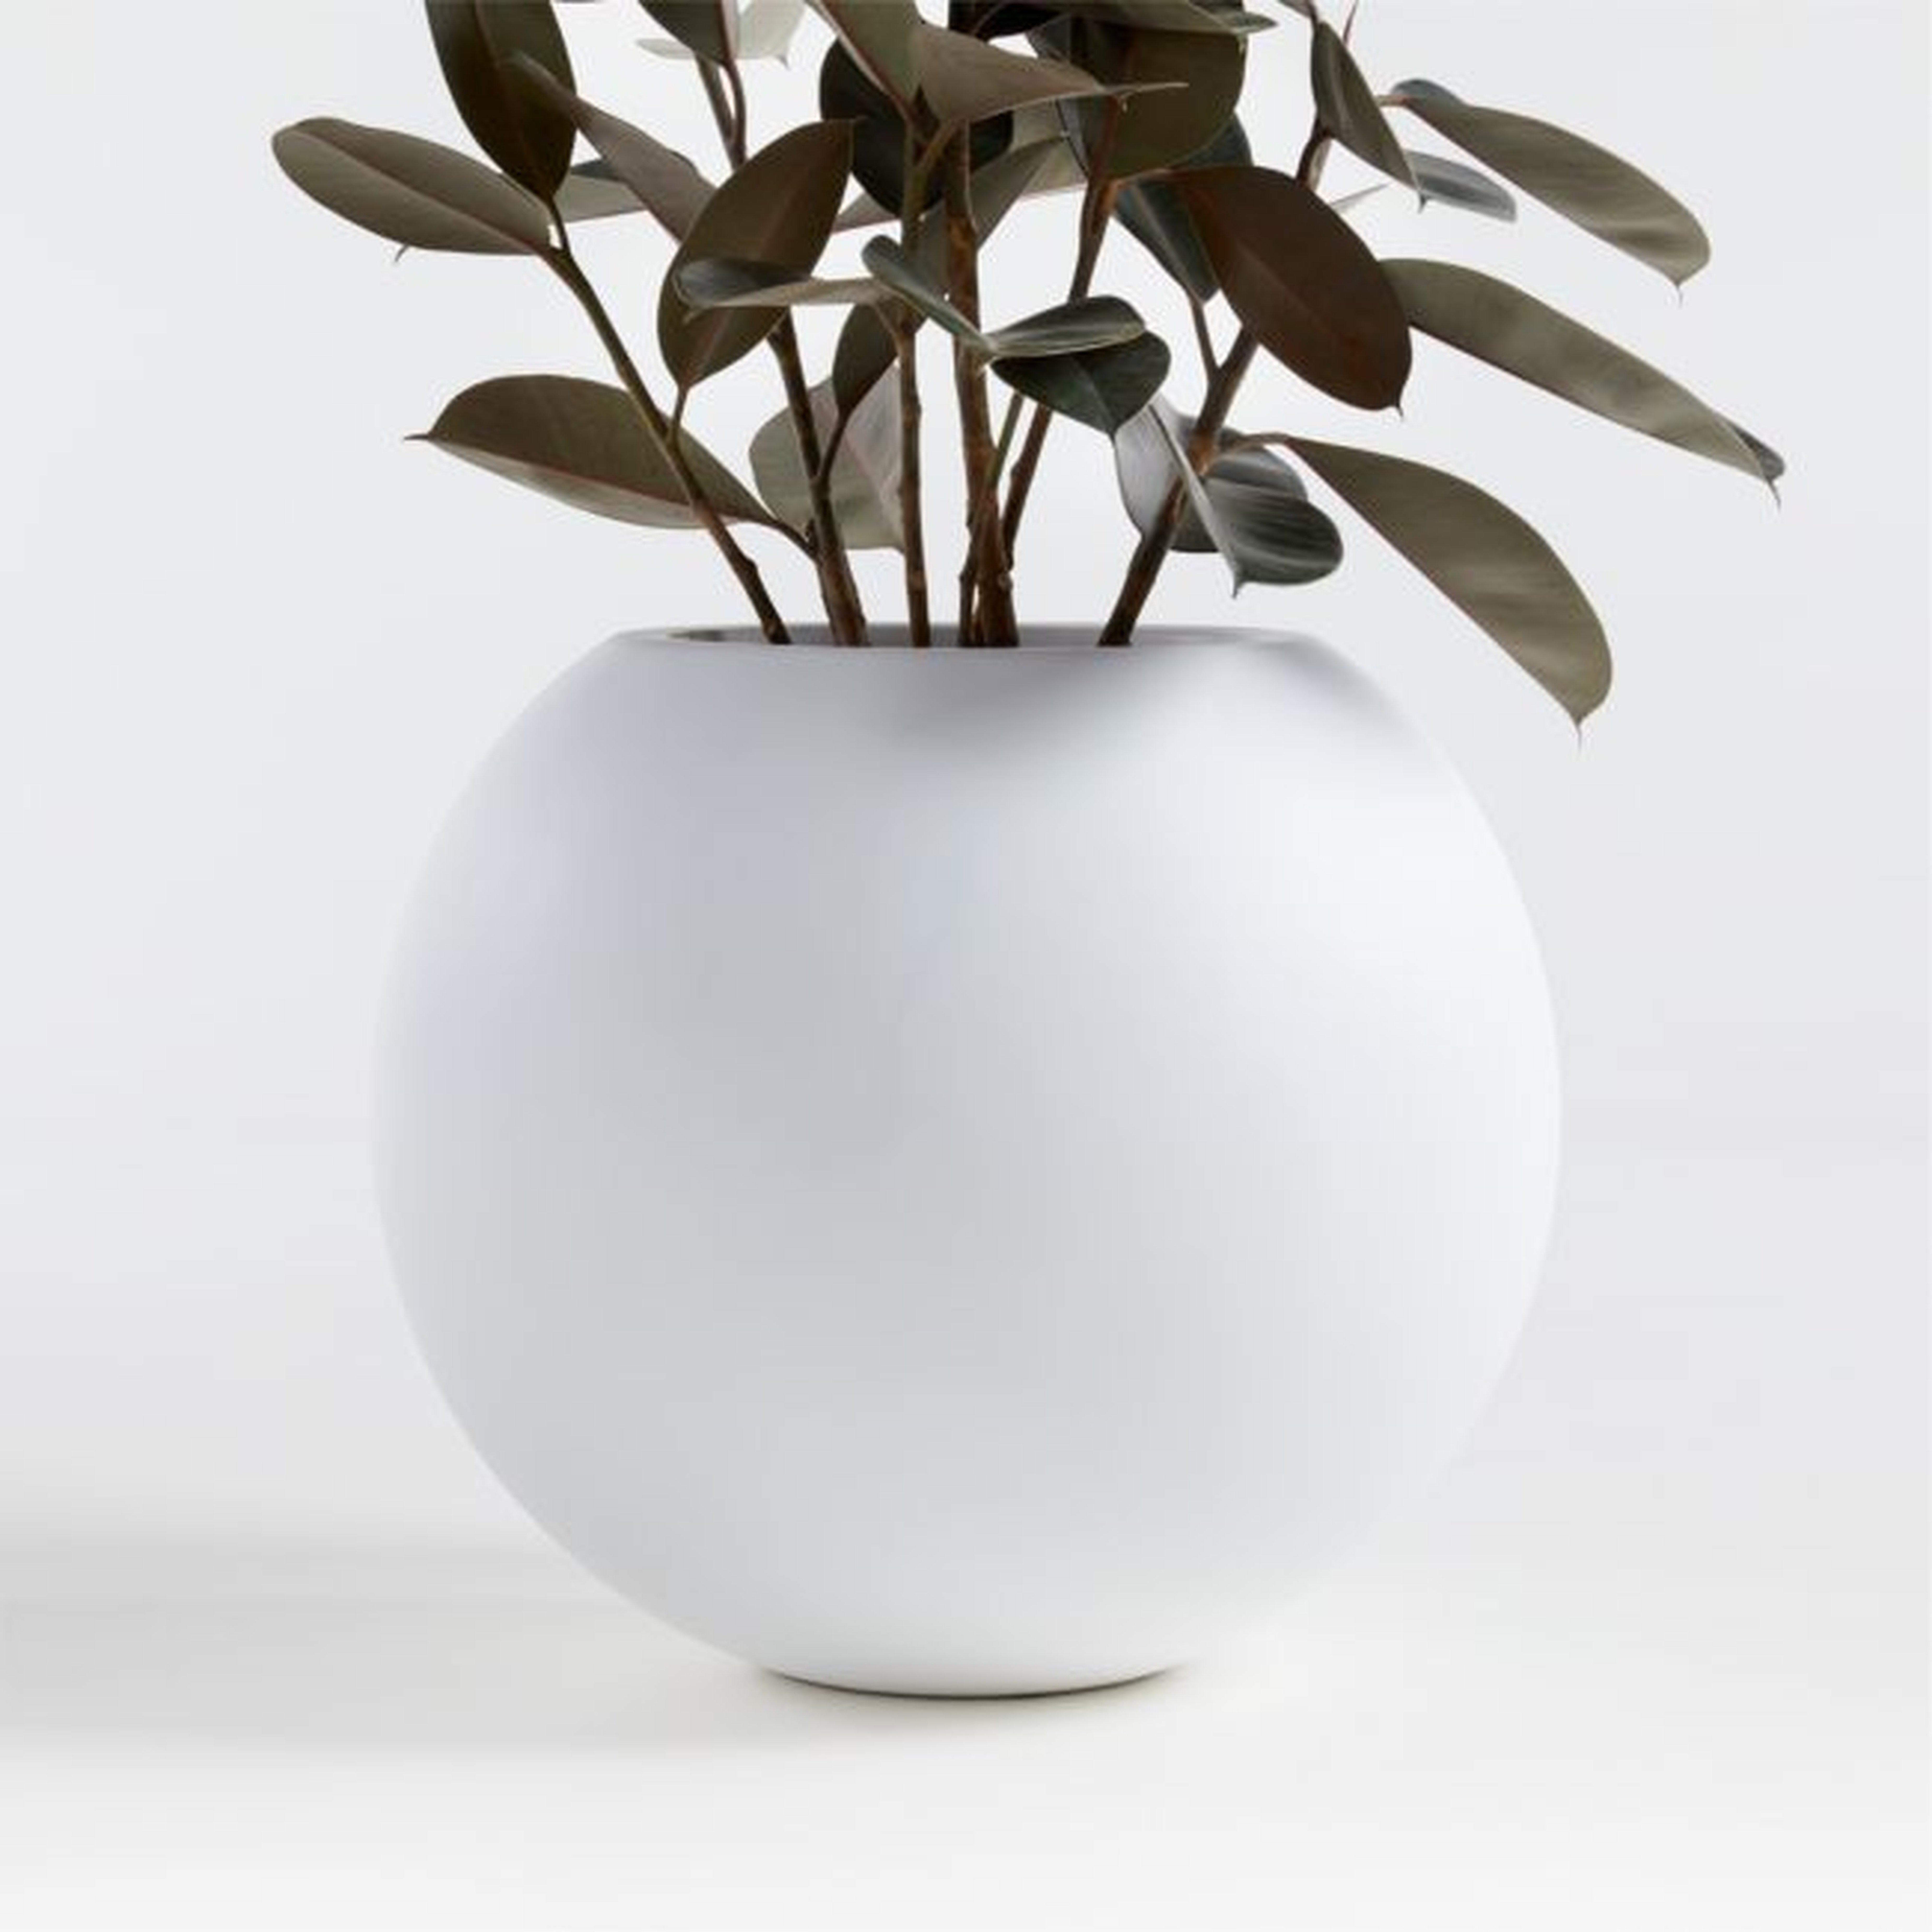 Sphere Small White Indoor/Outdoor Planter - Crate and Barrel